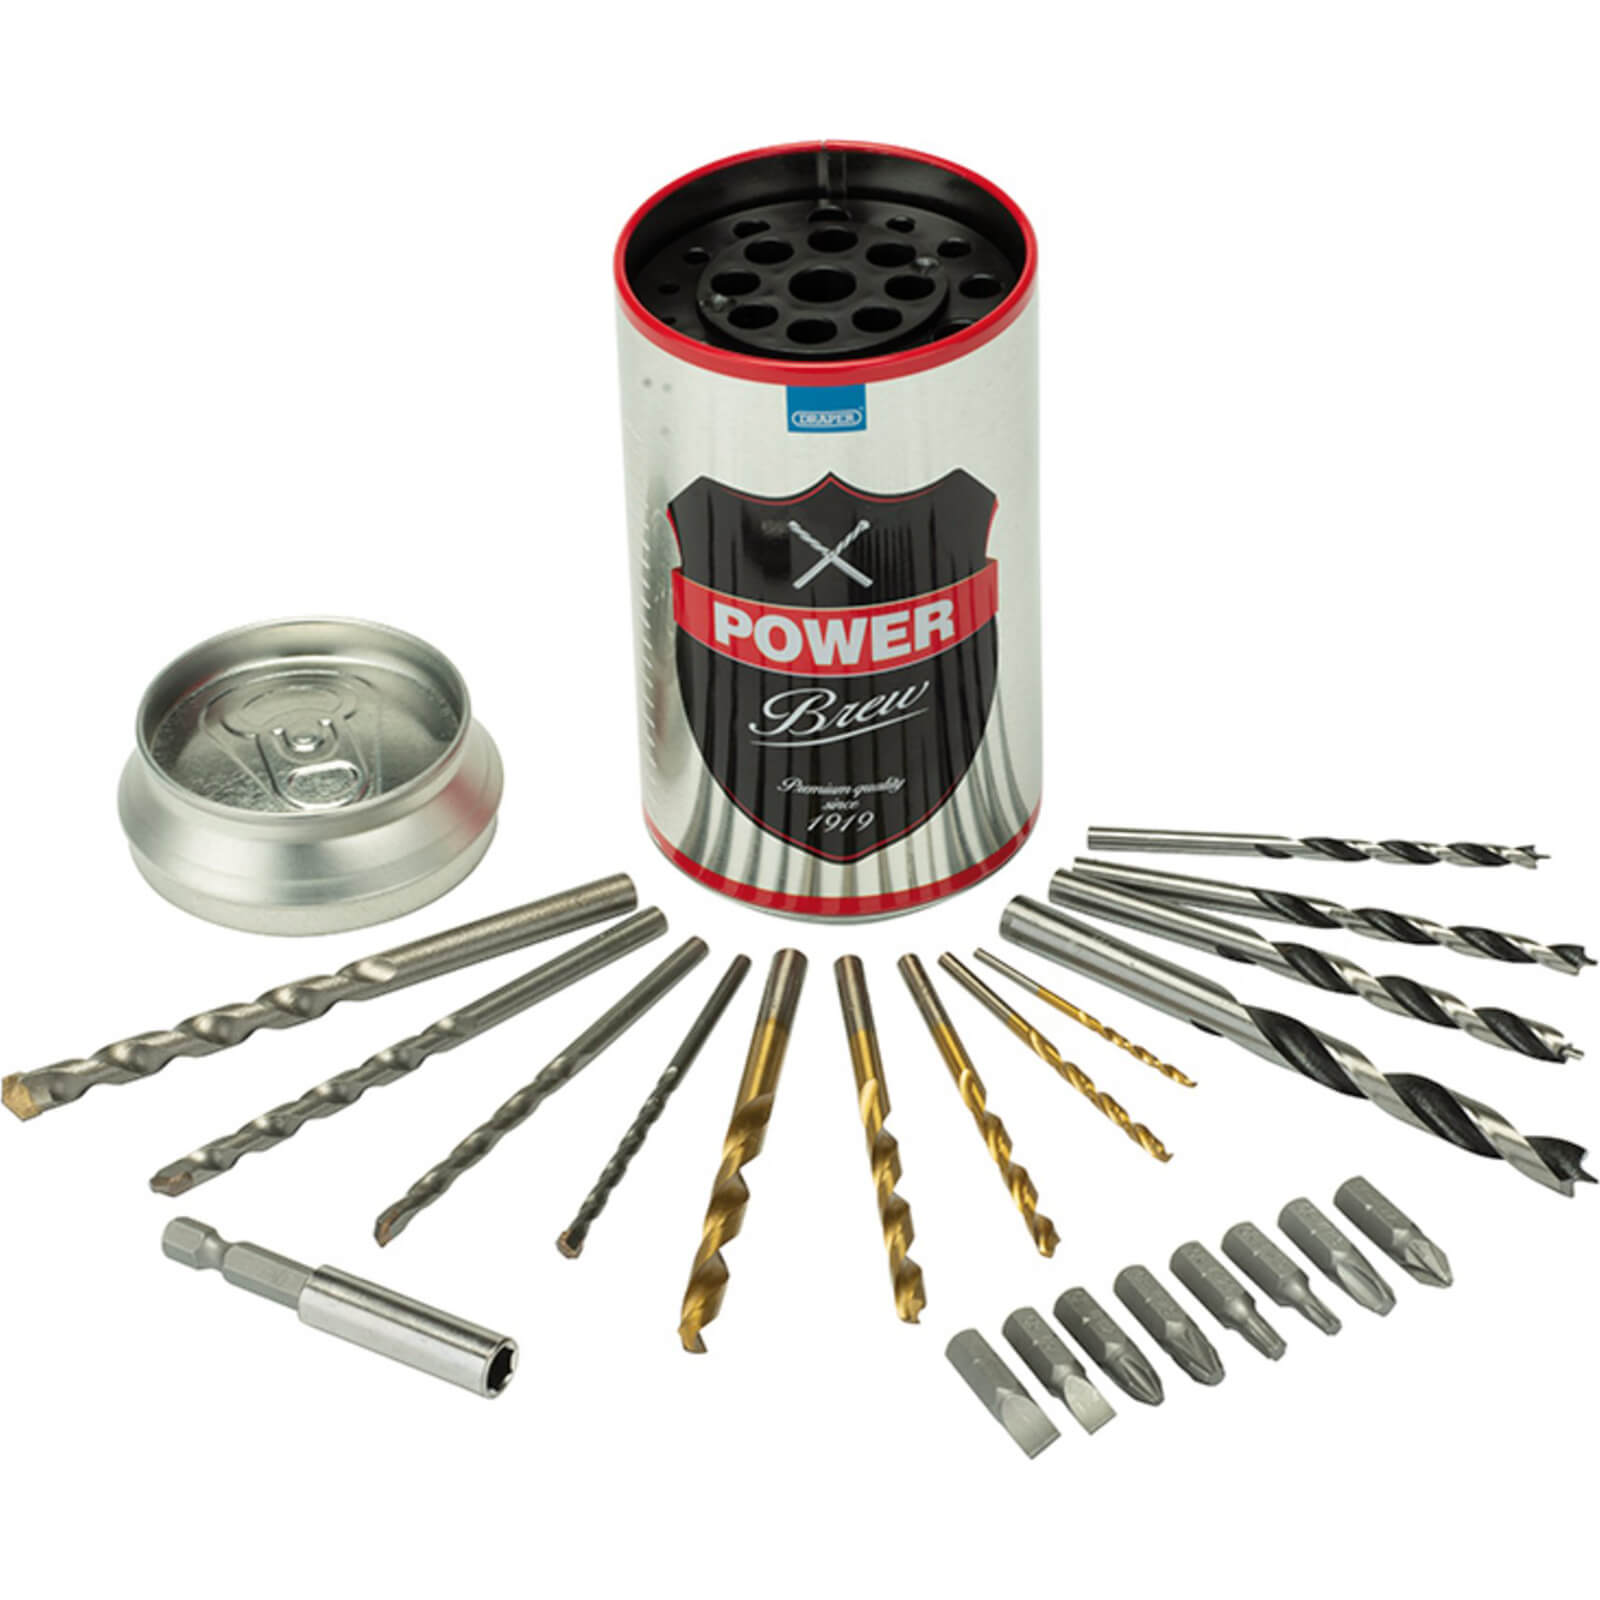 Image of Draper Power Brew Beer Can Drill and Screwdriver Bit Set